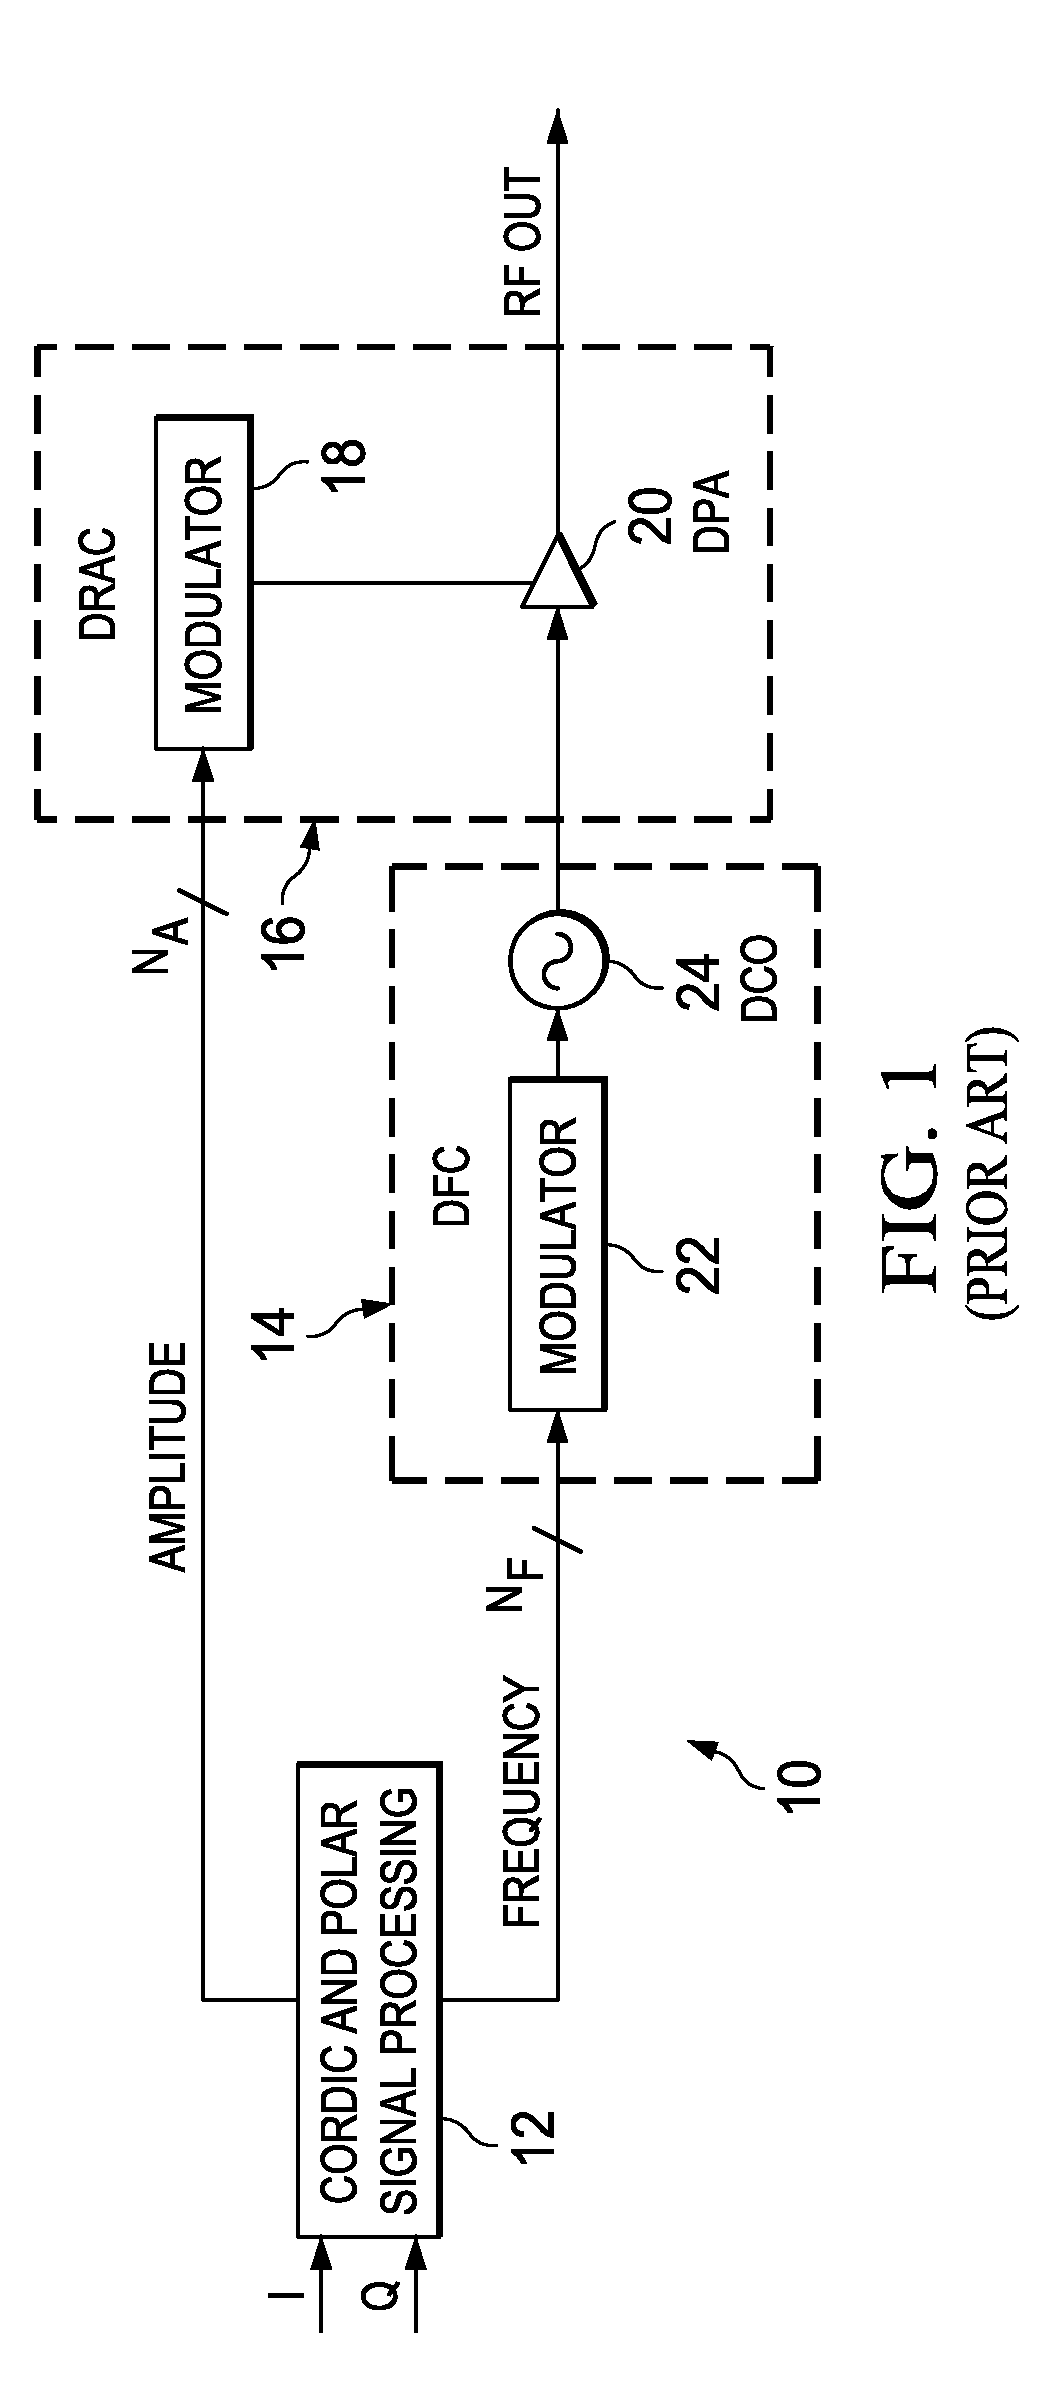 Local oscillator incorporating phase command exception handling utilizing a quadrature switch